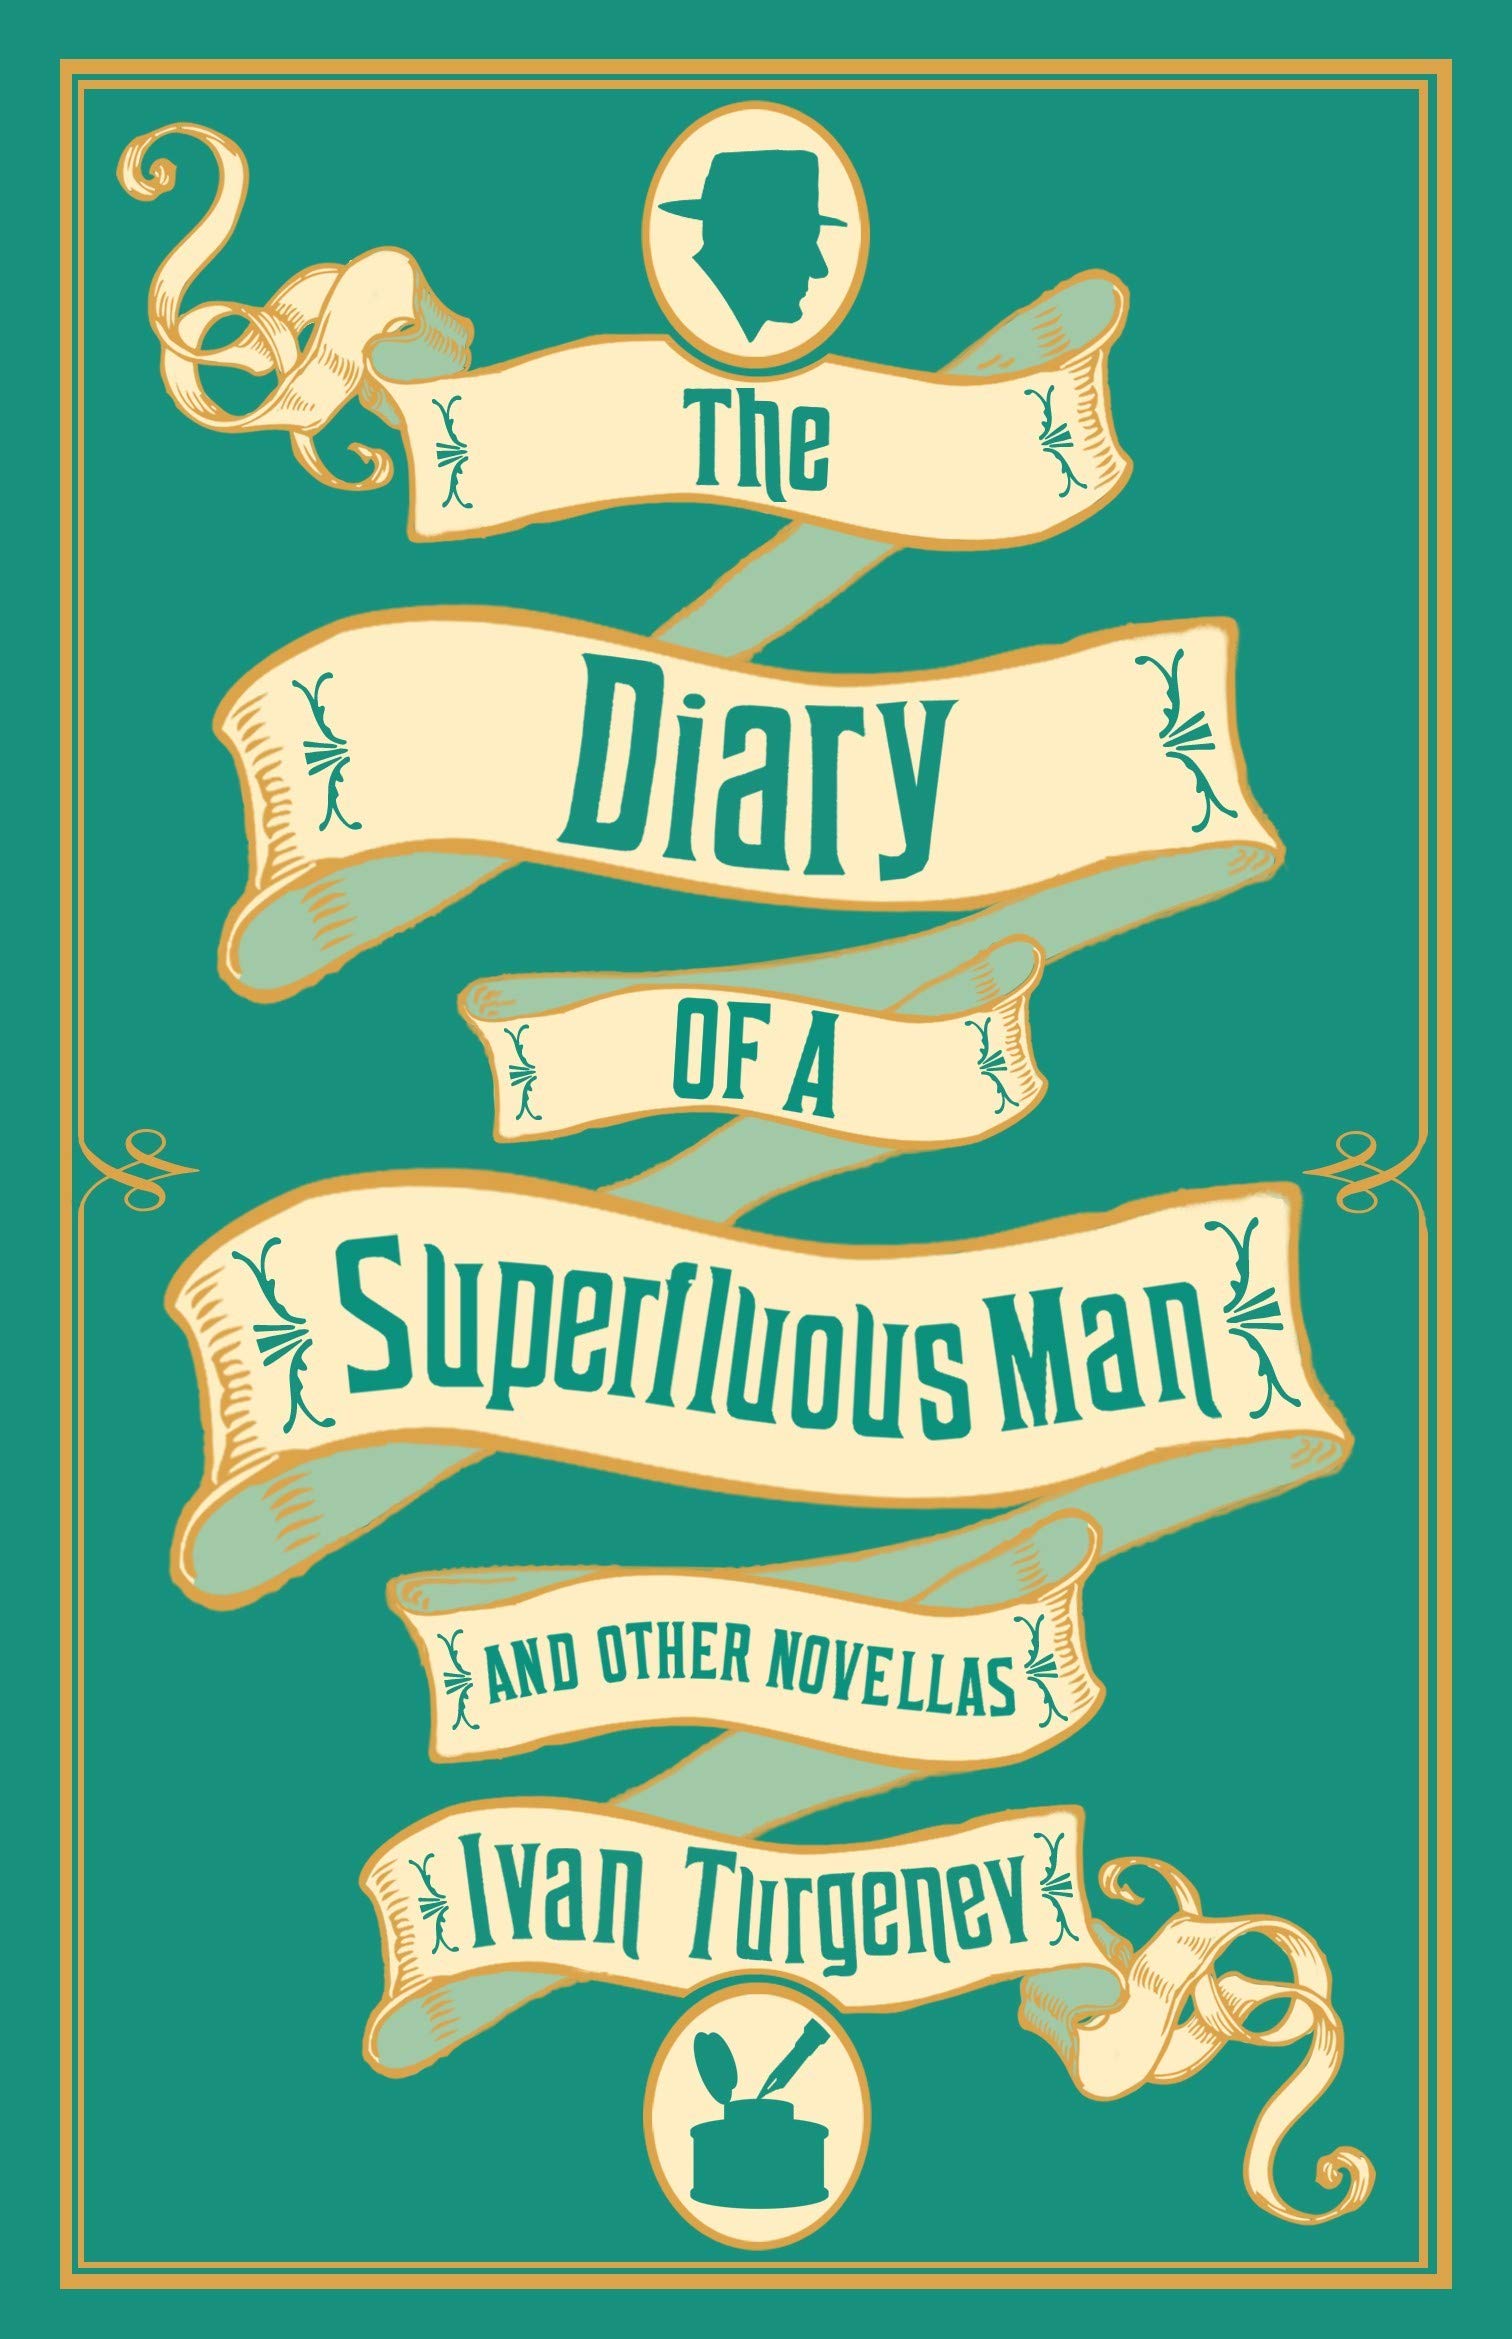 Diary of a Superfluous Man and Other Novellas